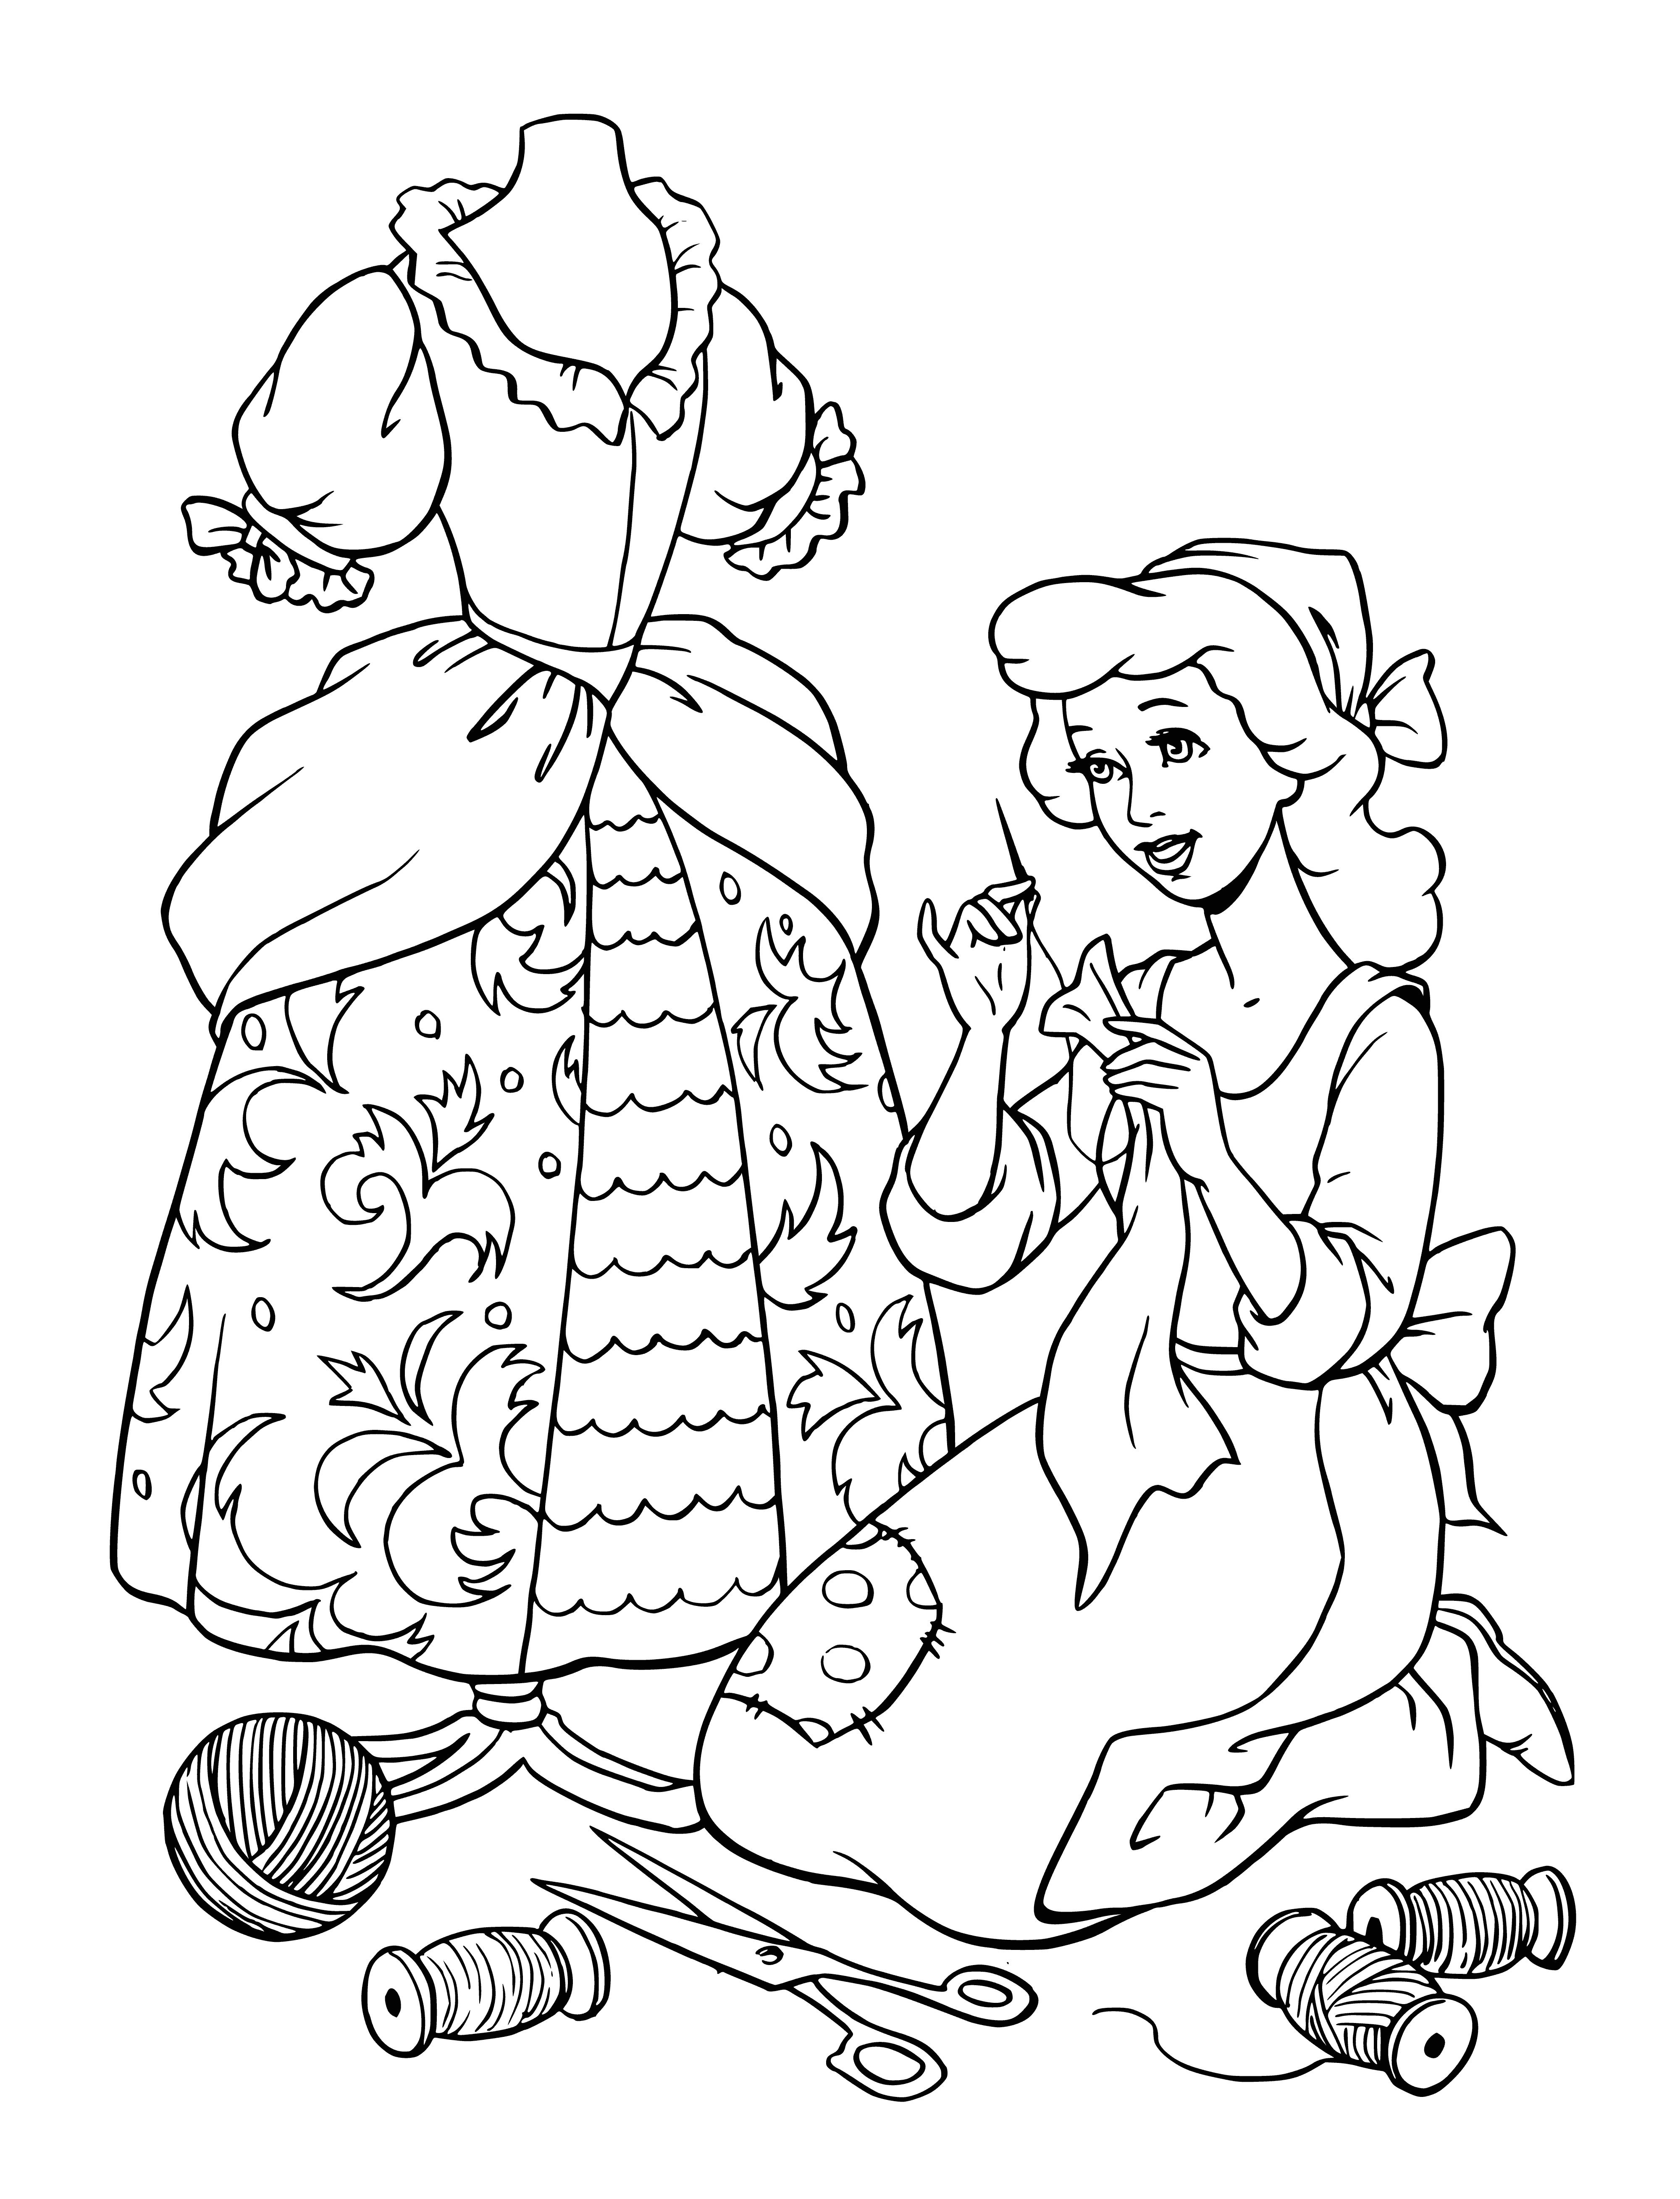 coloring page: -> Cinderella stands with a pumpkin in hand, smiling at a castle in a blue dress. #Cinderella